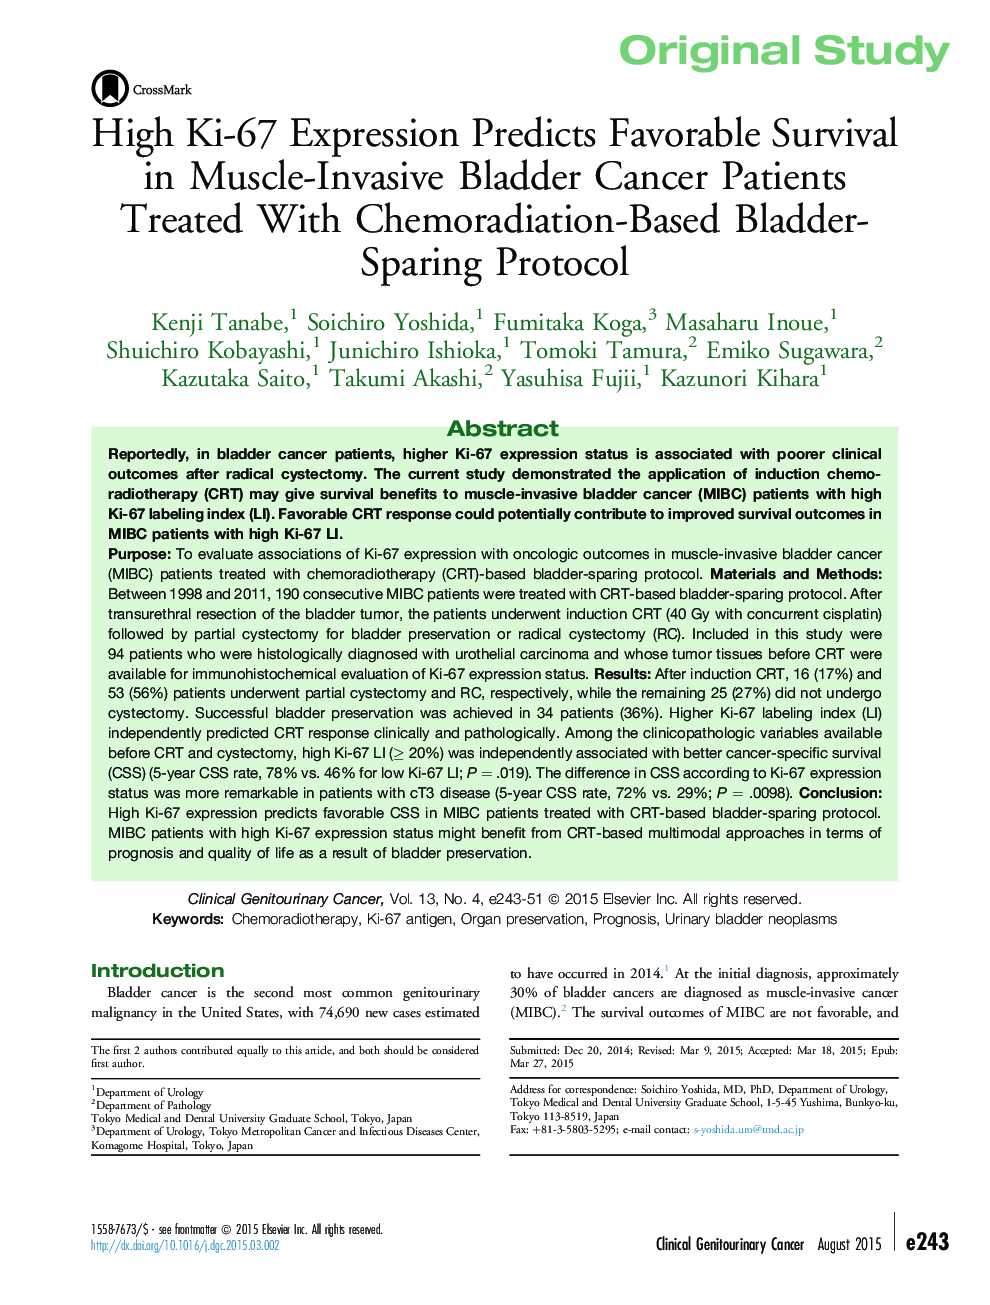 High Ki-67 Expression Predicts Favorable Survival in Muscle-Invasive Bladder Cancer Patients Treated With Chemoradiation-Based Bladder-Sparing Protocol